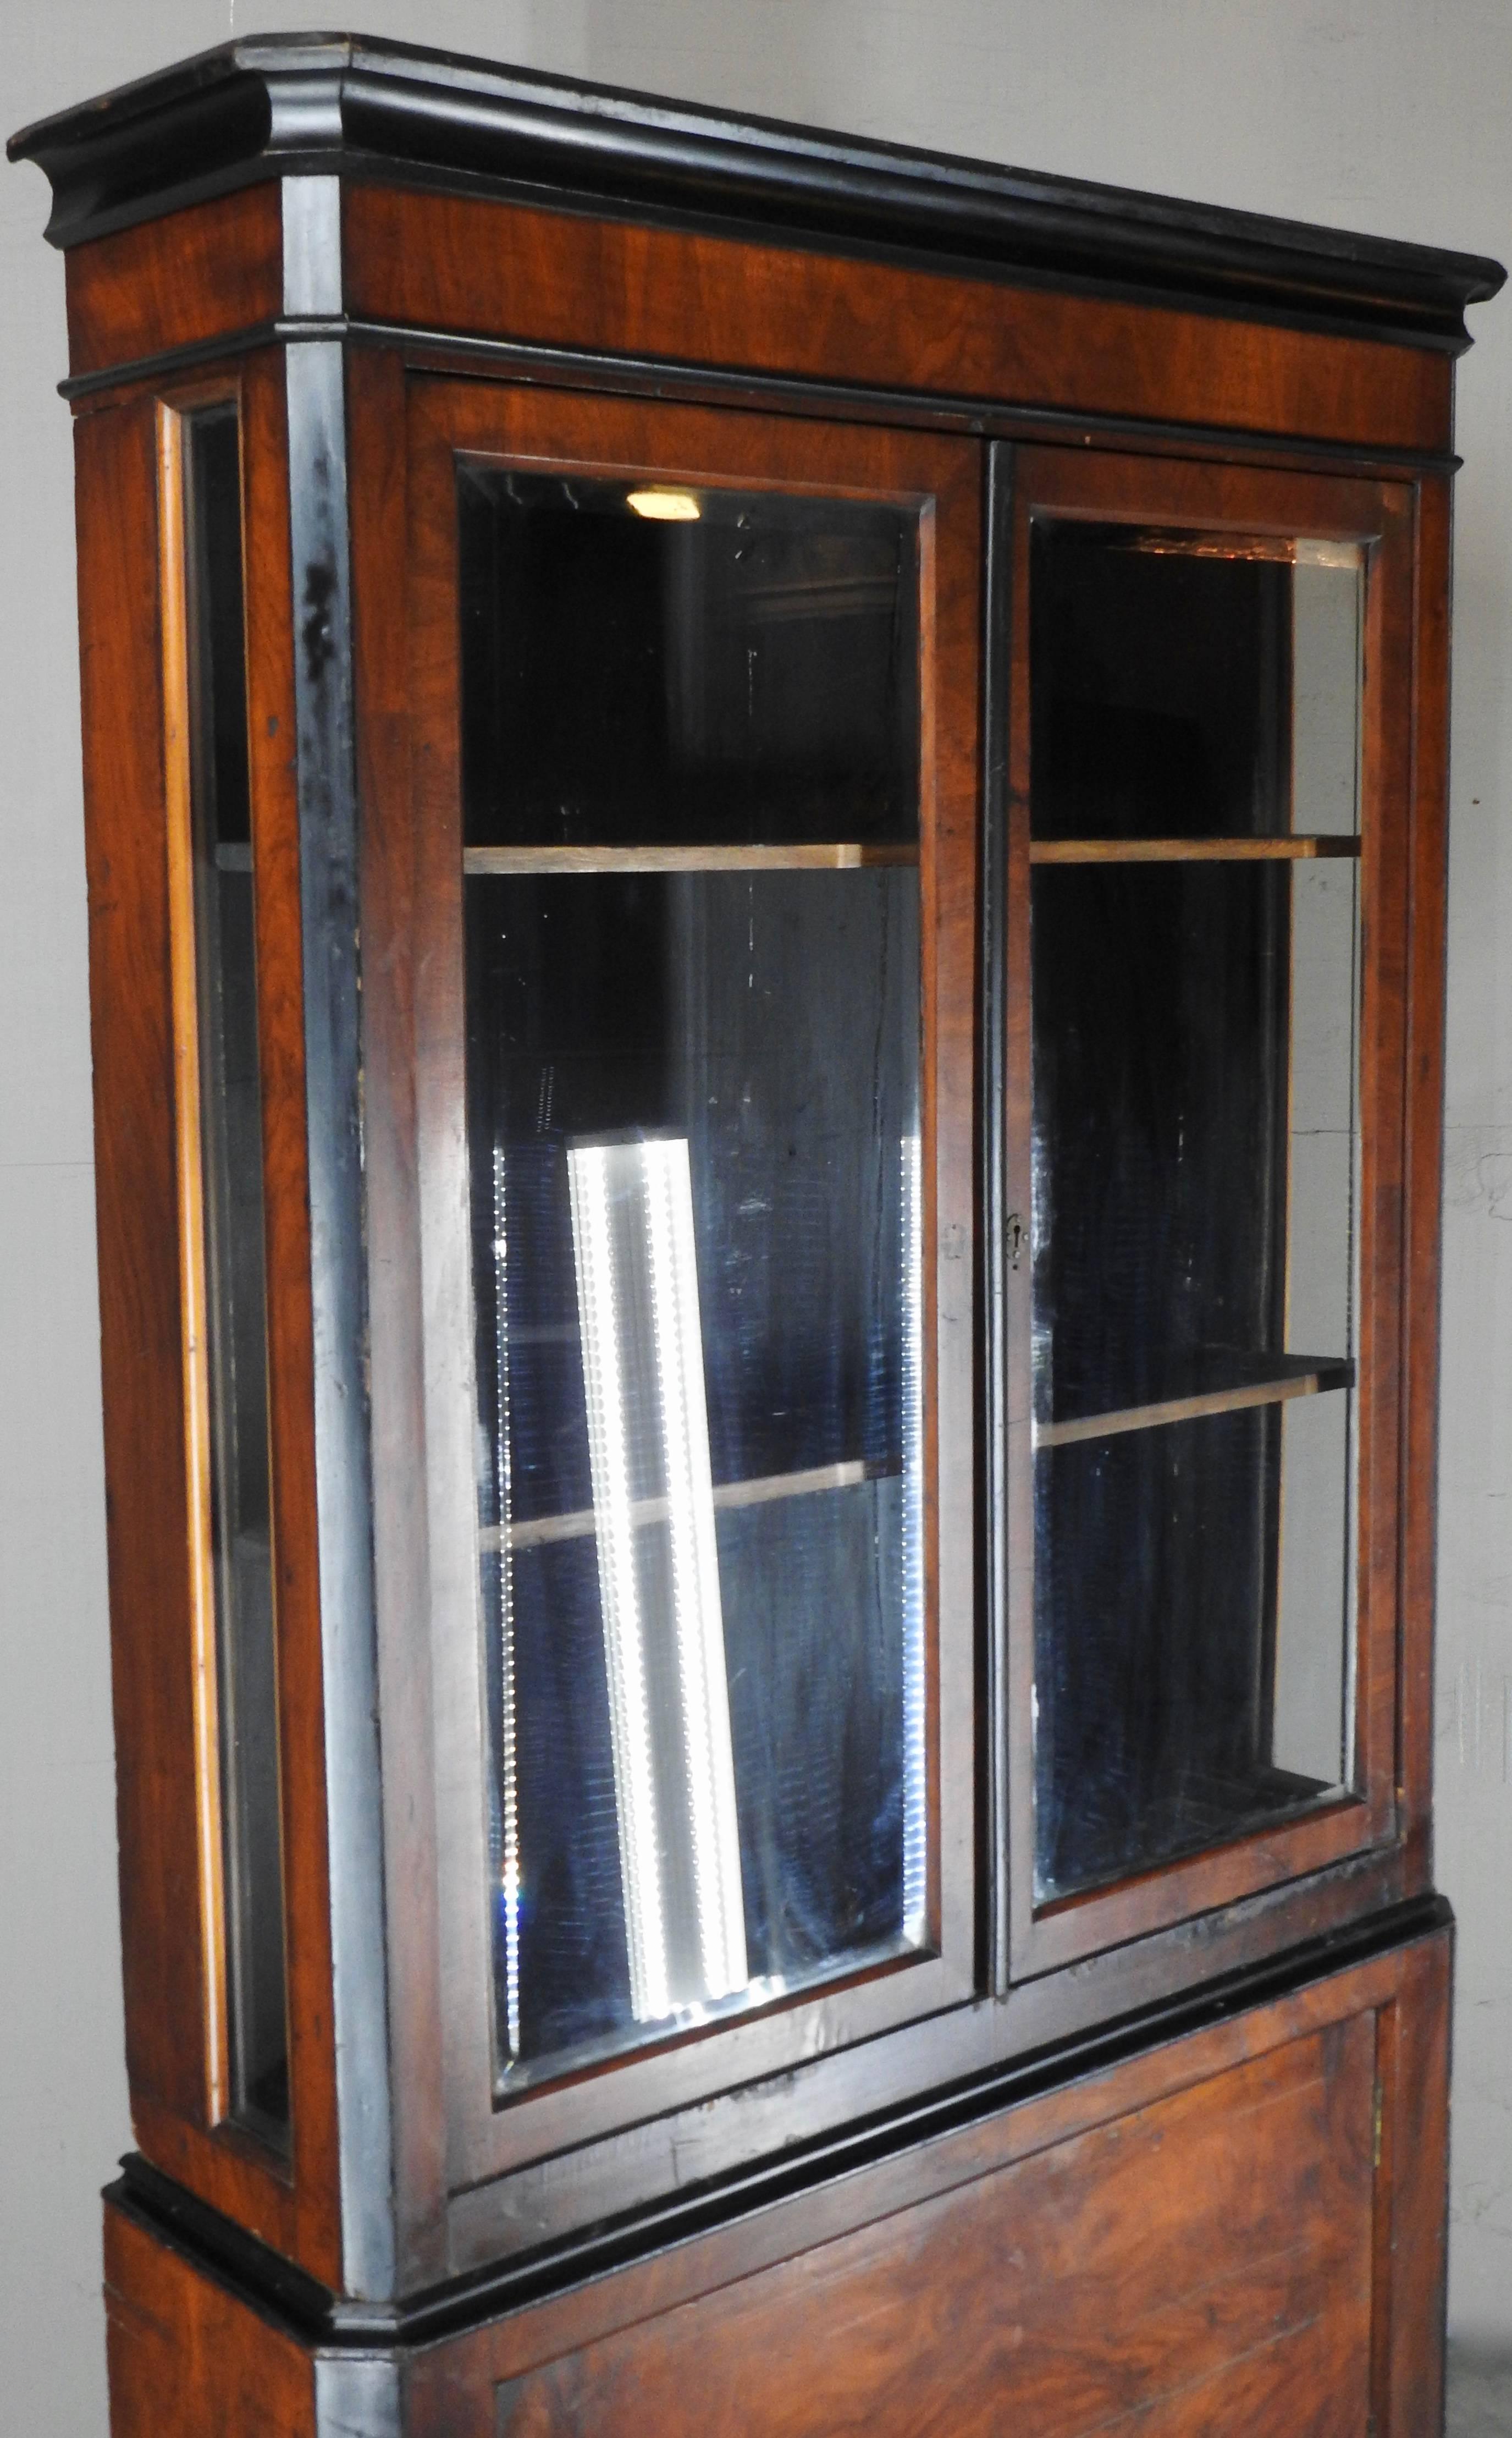 Burled walnut veneer forms this Biedermeier Bookcase from Germany. Two doors with glass open up to shelving. The bottom door opens for ample storage.
Angled lines make up the corners. This piece is from the 1930s.